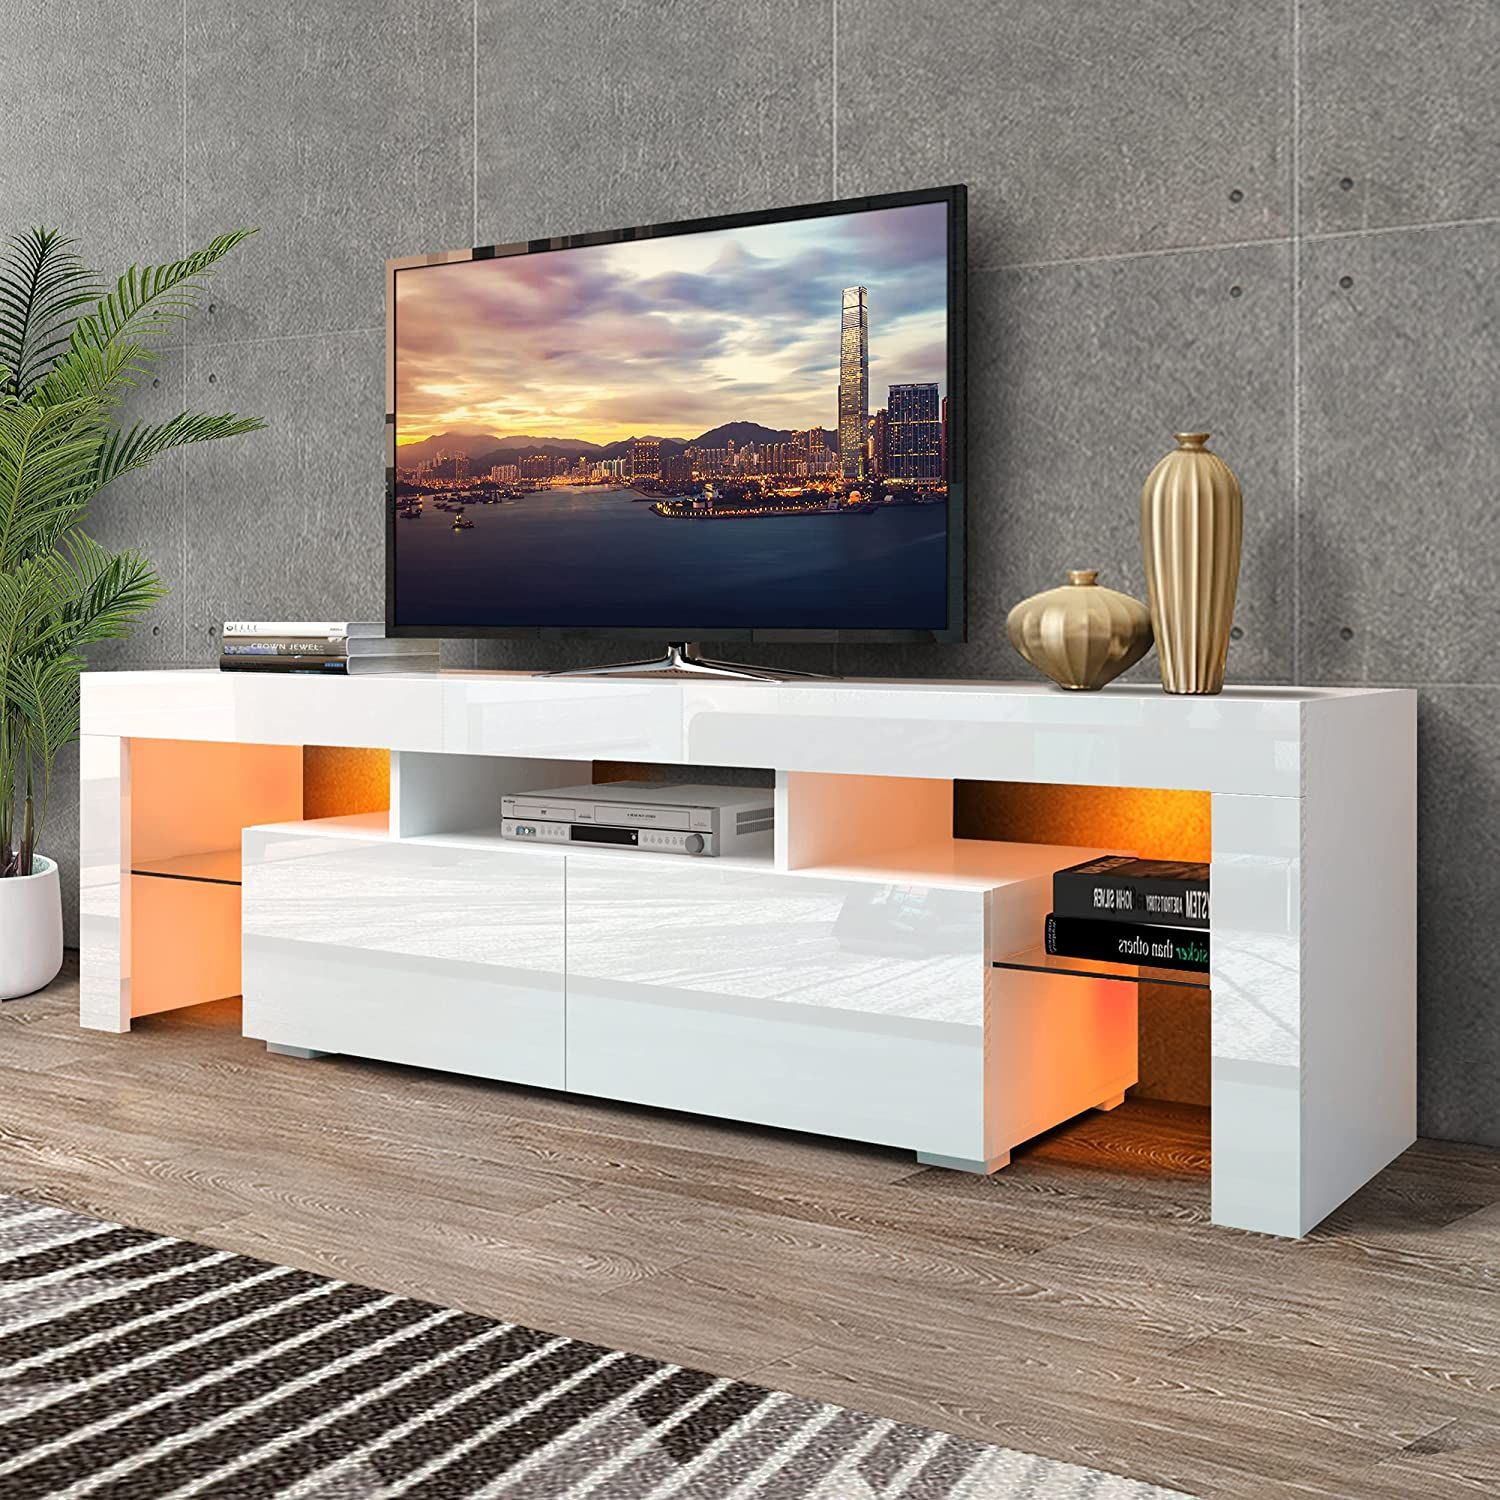 Dmaith Tv Stand | Ts003 Tv Stand With Led Lights | 2 Drawers And Open Within Tv Stands With Led Lights & Power Outlet (Gallery 7 of 20)